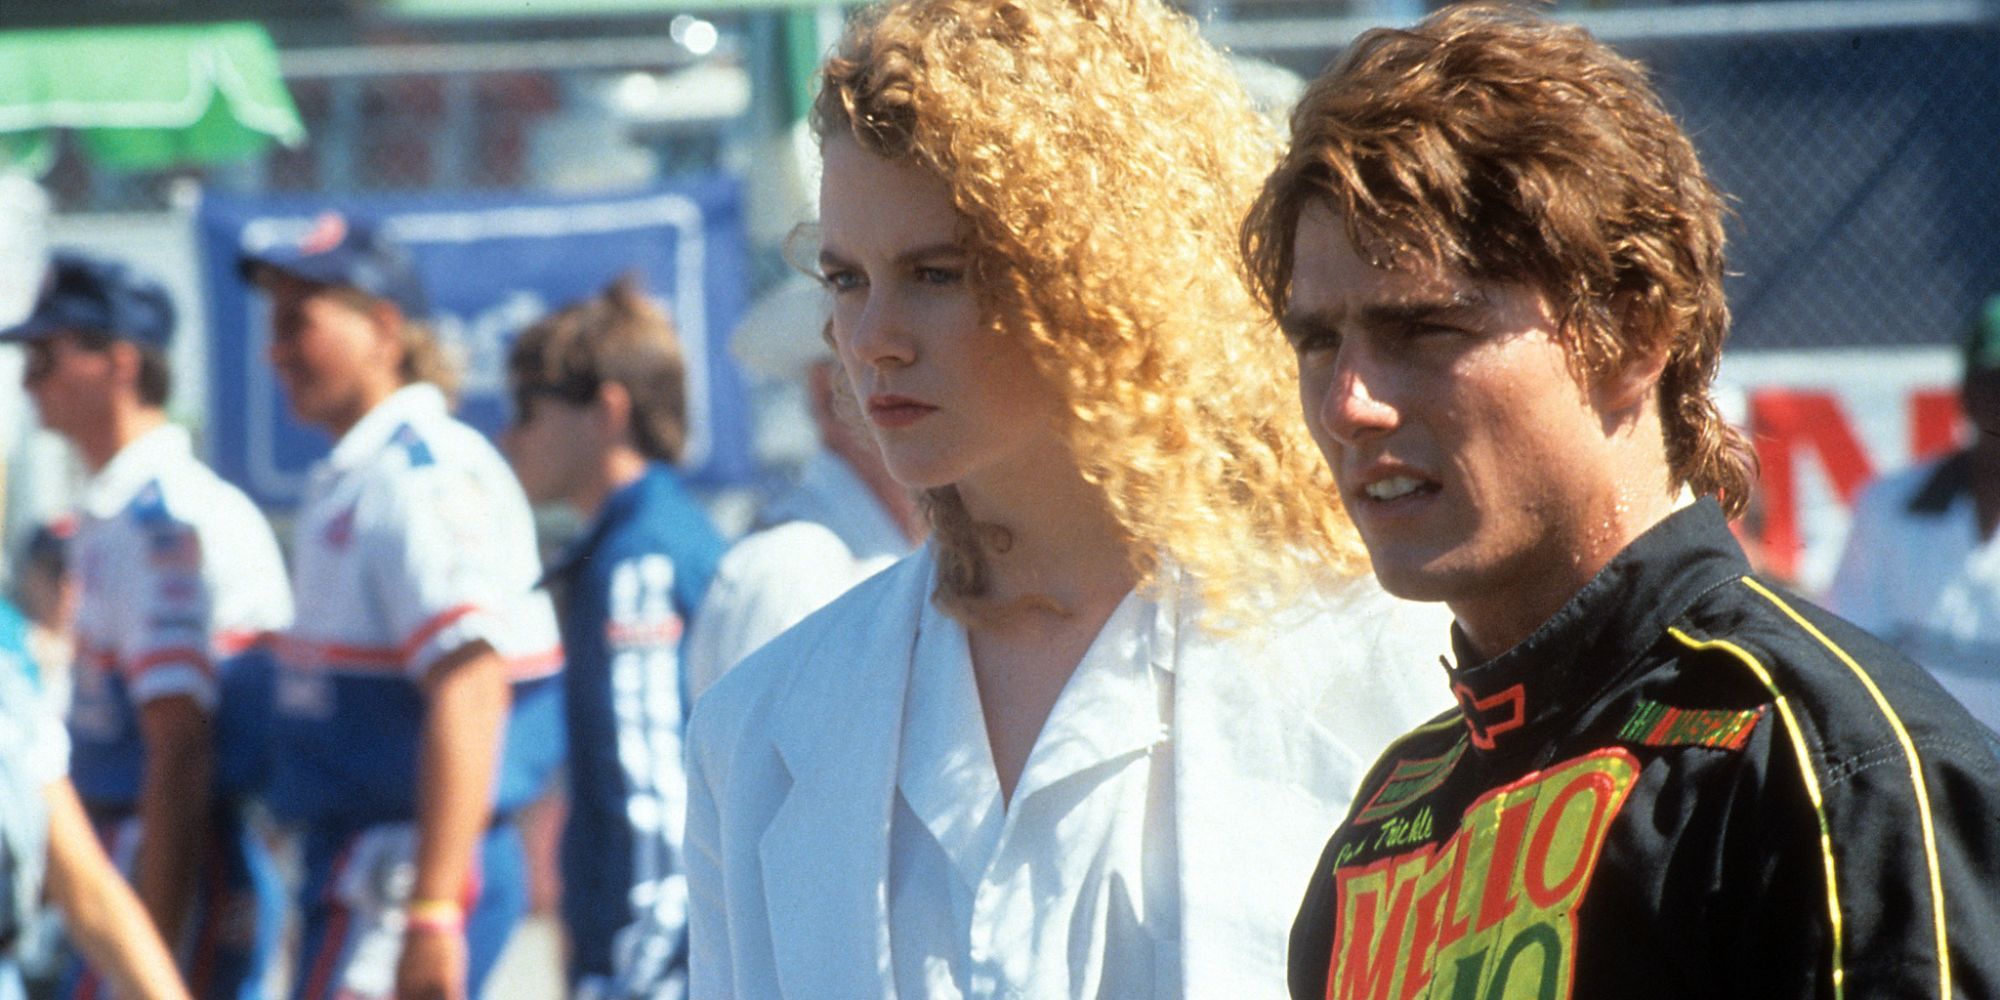 Tom Cruise in a NASCAR outfit next to Nicole Kidman in 'Days of Thunder' (1990)